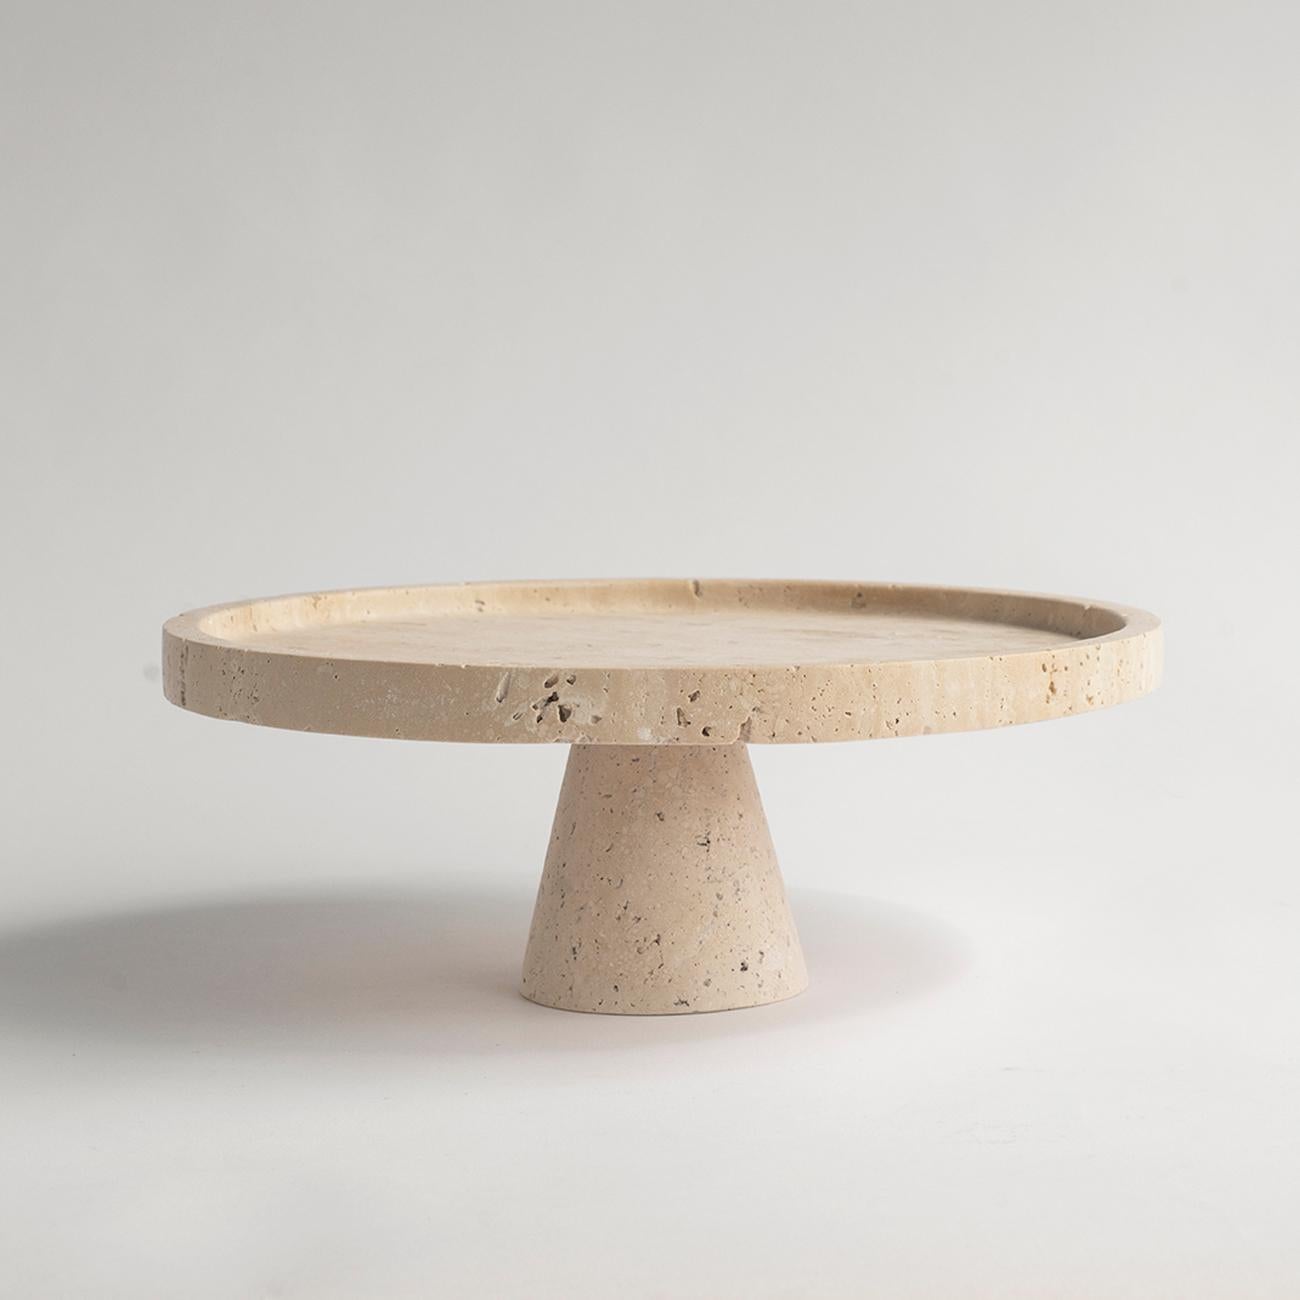 Put your delectable desserts on a pedestal with this gorgeous travertine cake stand from Kiwano. Hand crafted by Turkish artisans, this stylish display will ensure your baking skills never go unnoticed. Glass dome not included. We recommend to put a